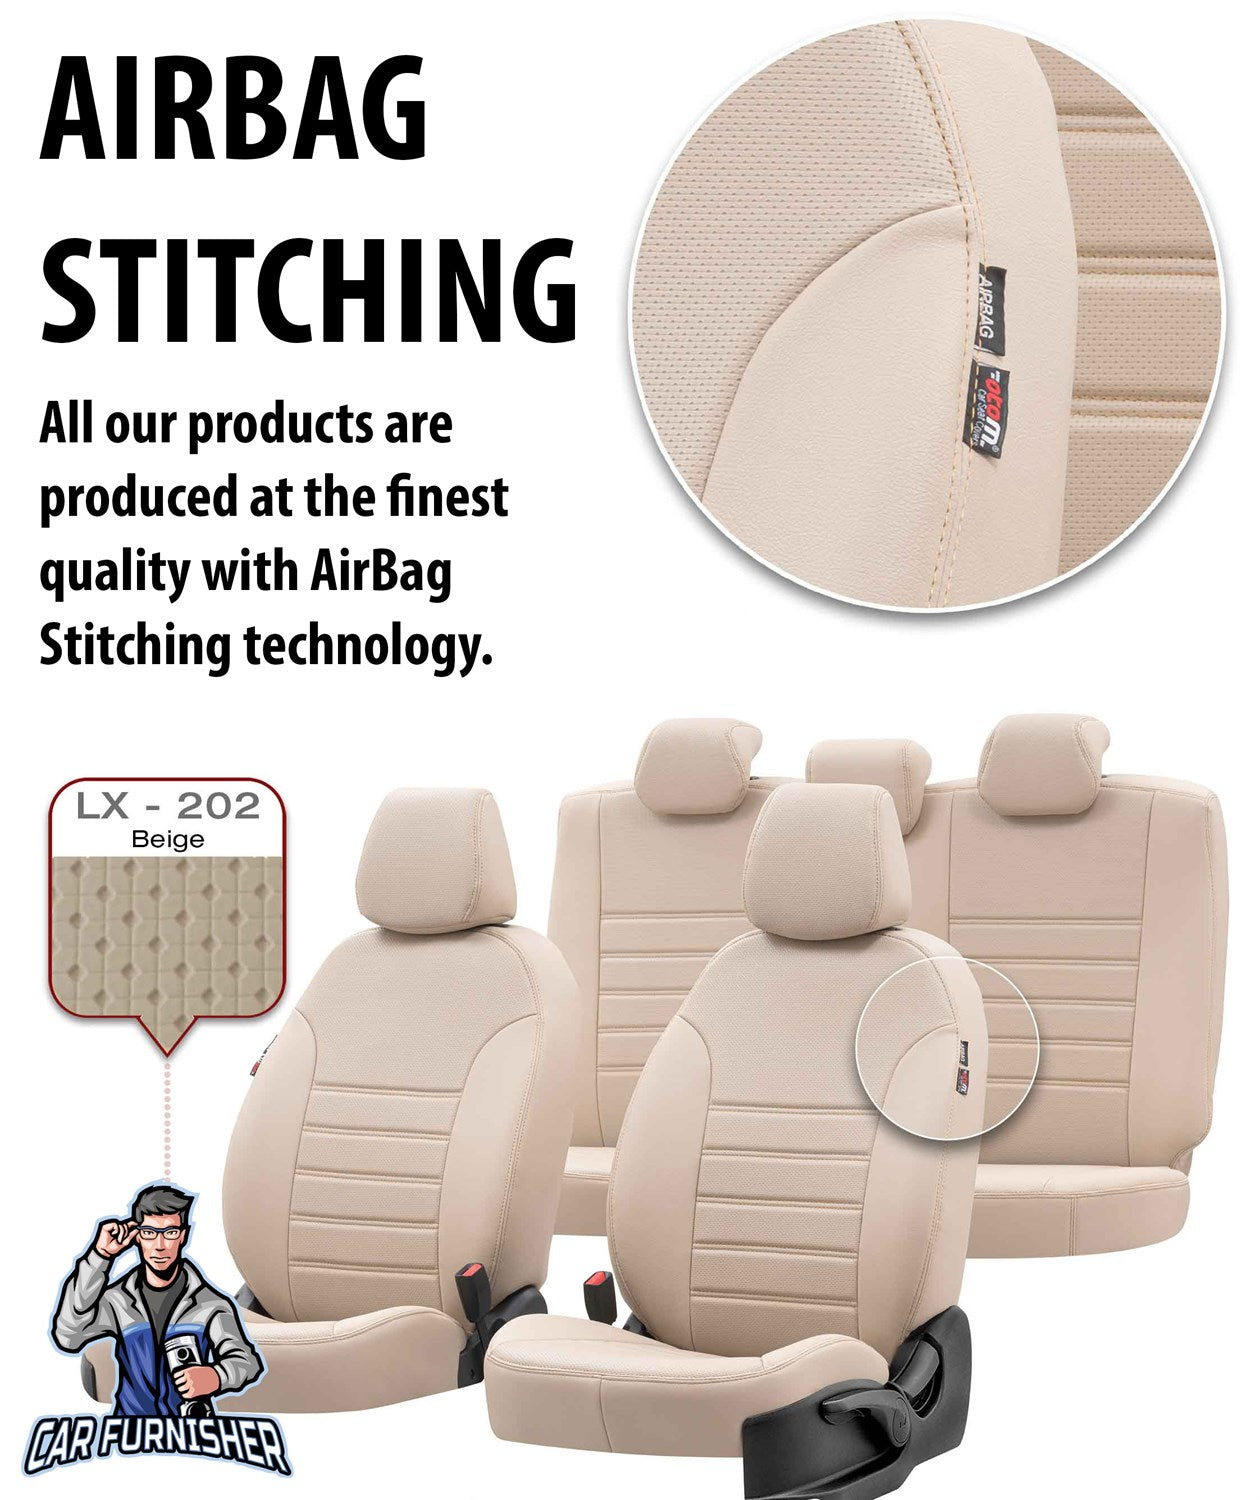 Fiat Scudo Seat Covers New York Leather Design Smoked Black Leather